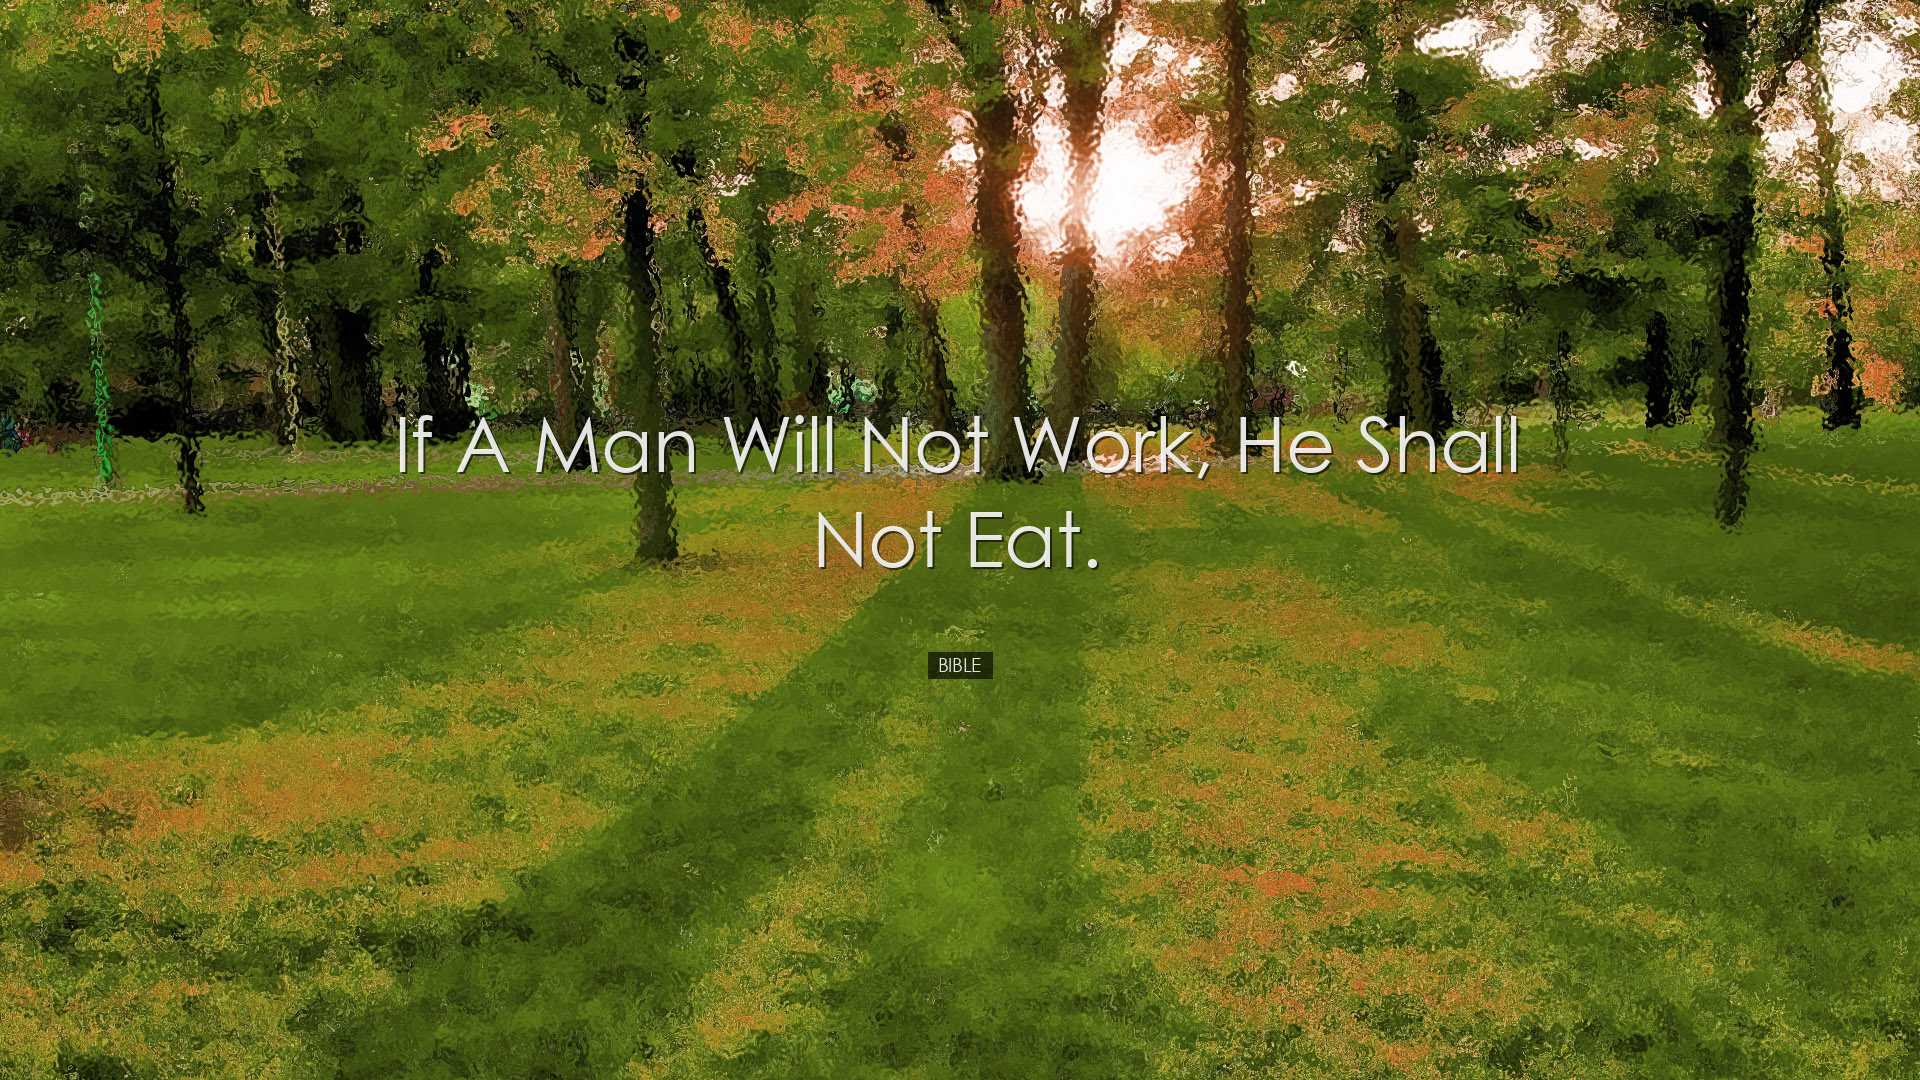 If a man will not work, he shall not eat. - Bible